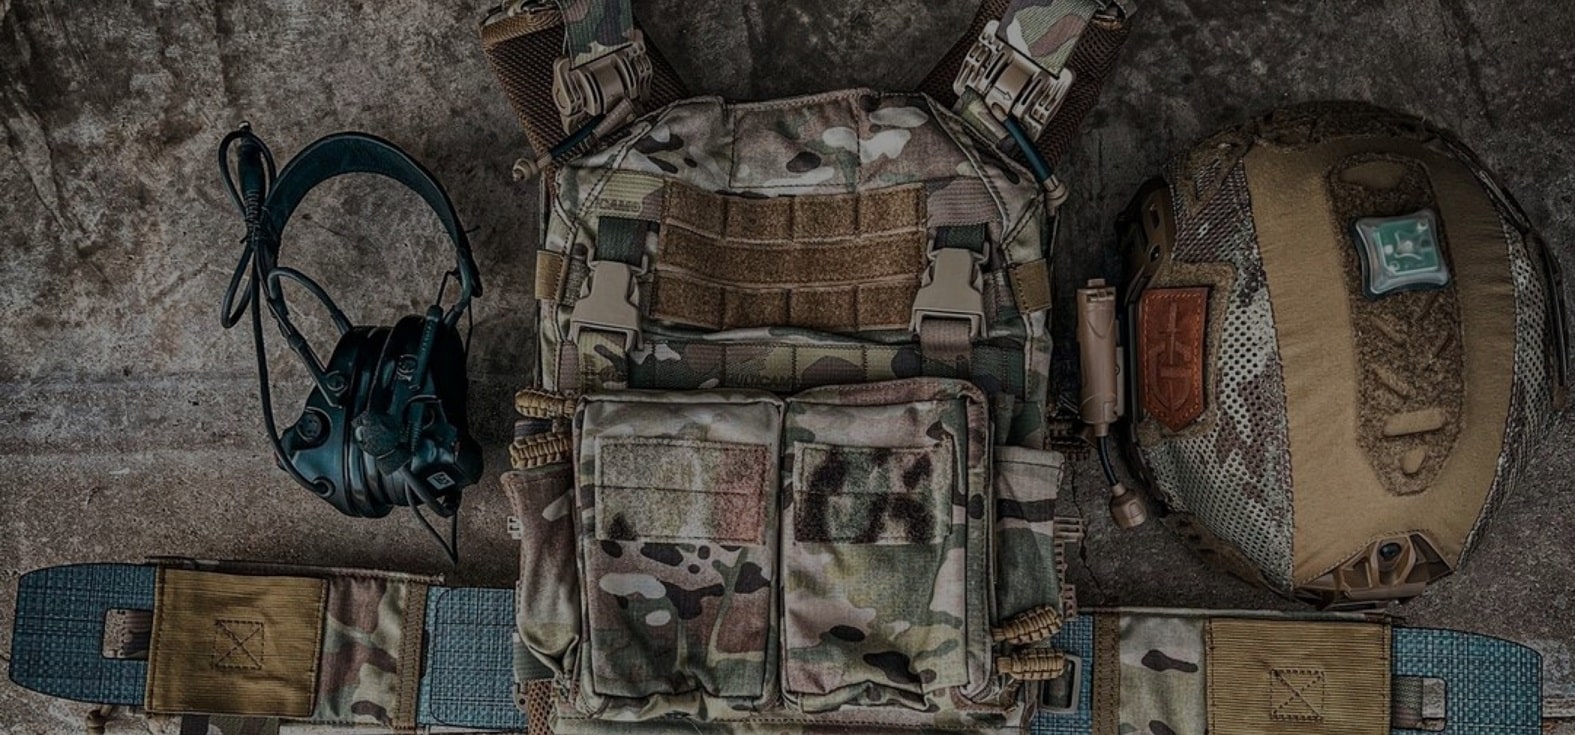 How to Choose the Best Plate Carrier -- Your Ultimate Safety Guide!